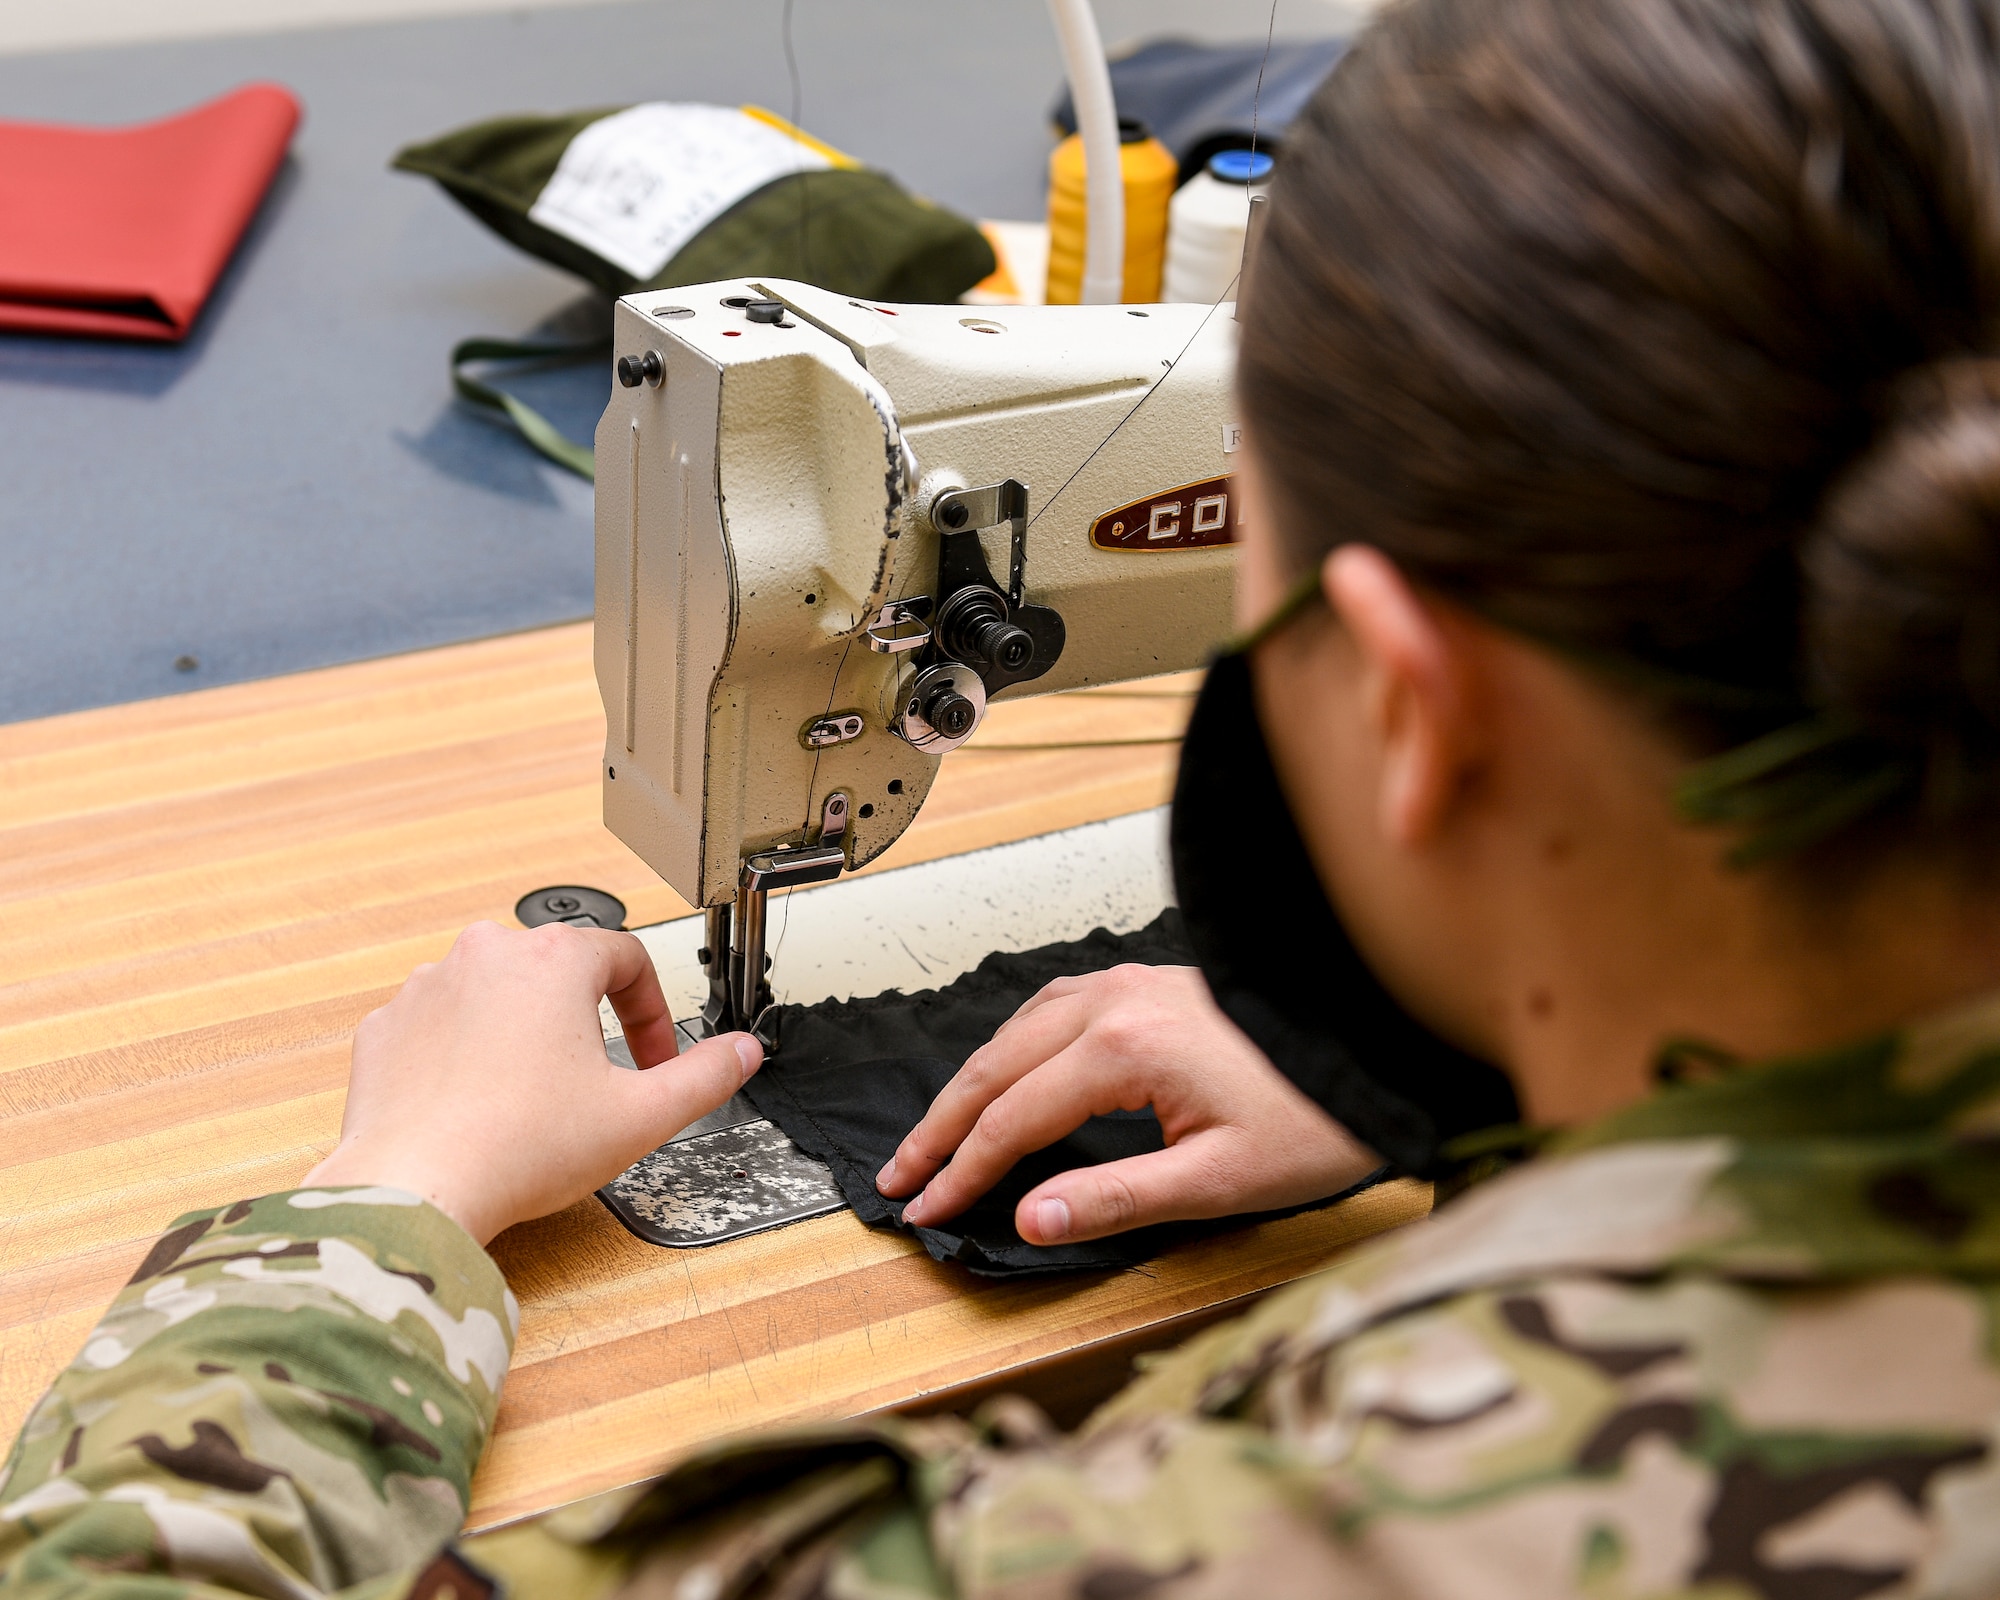 Airman with hands at a sewing machine.